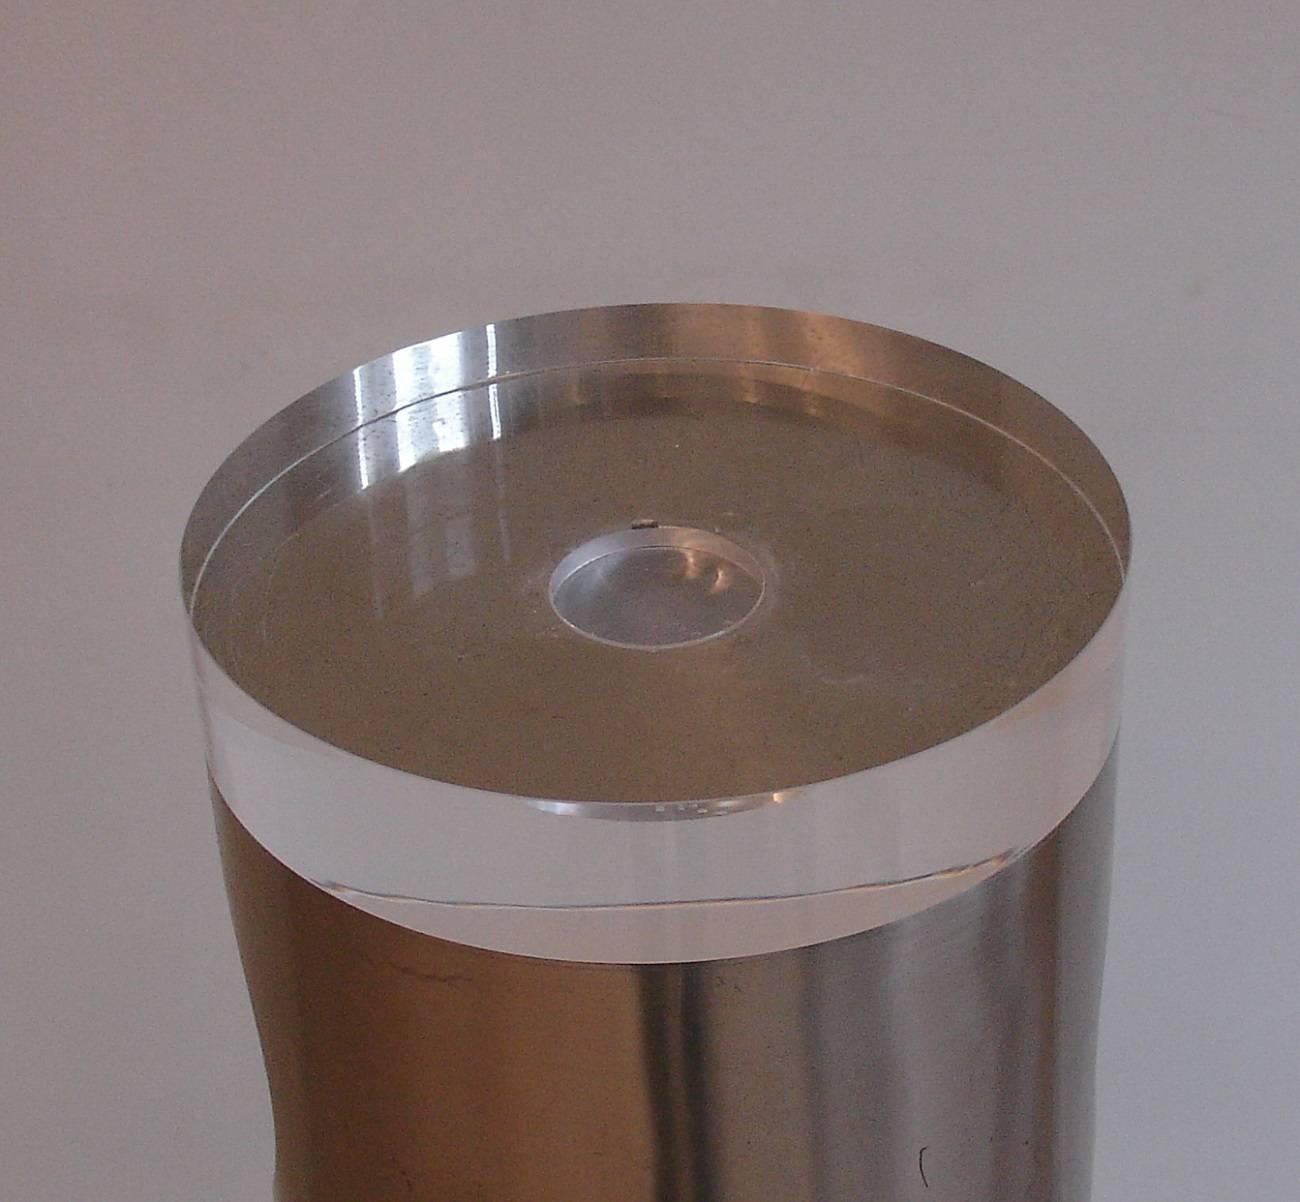 Unusual Brushed Steel and Perspex/Lucite Rotating Table Lamp, French circa 1970s For Sale 5